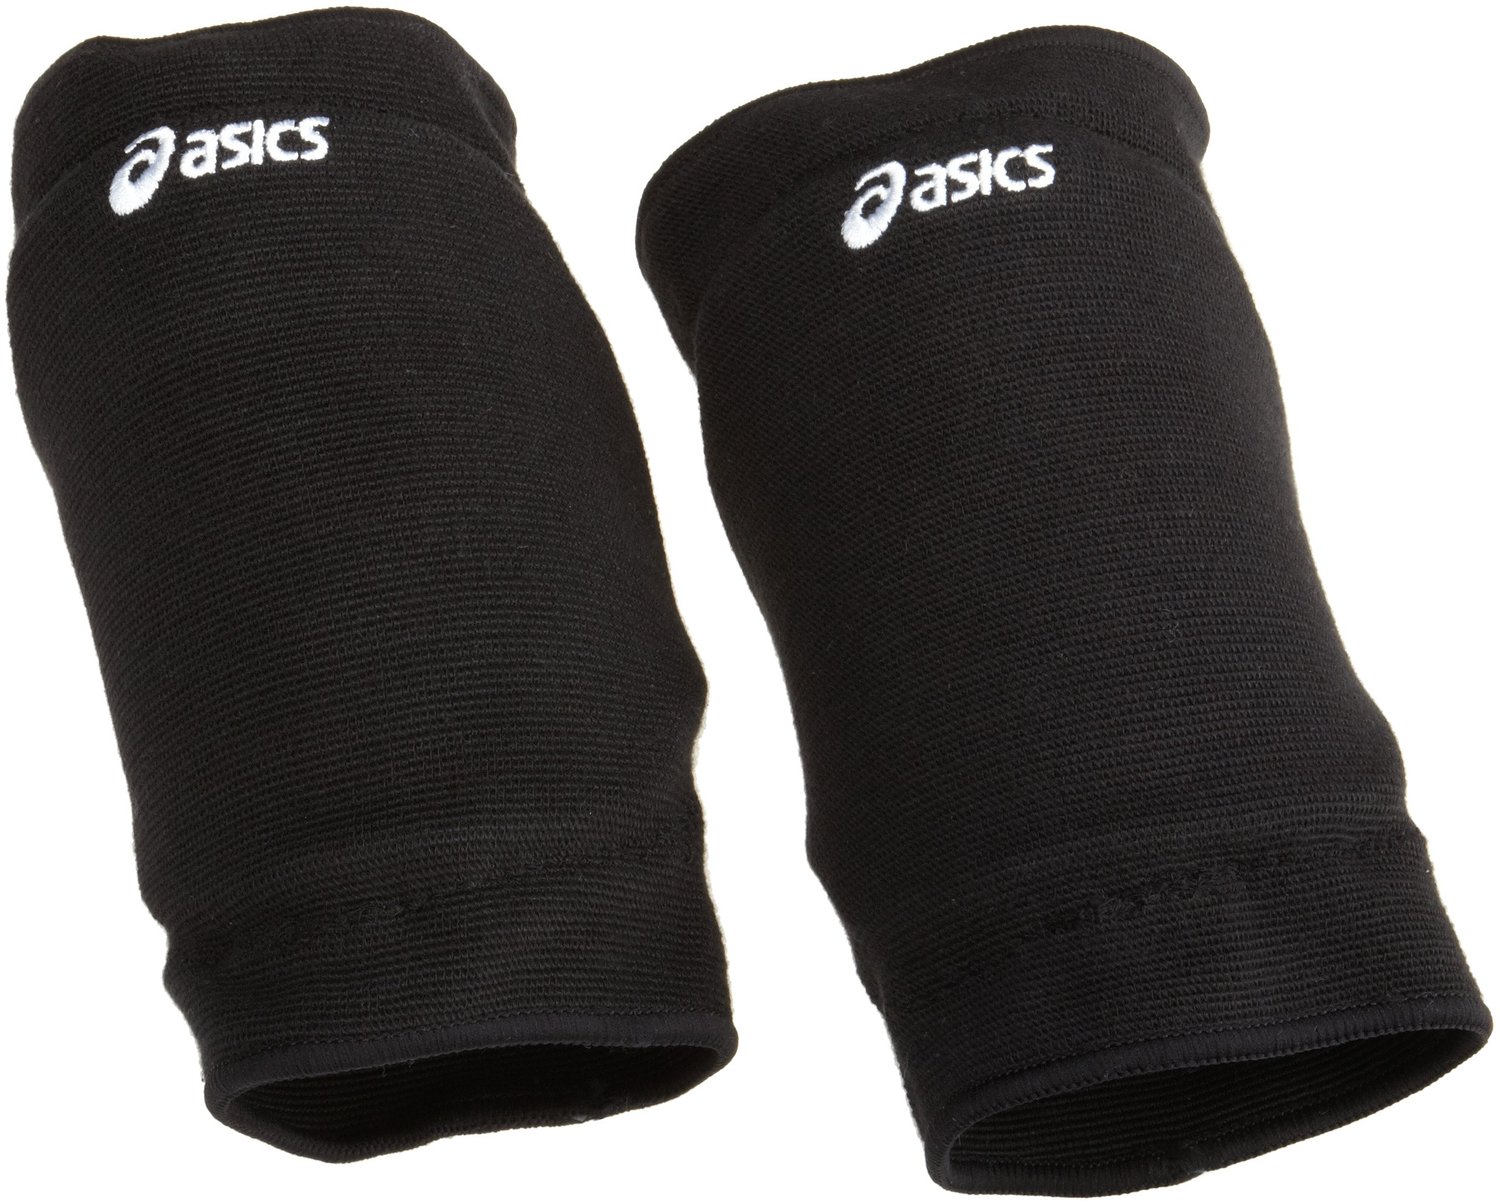 asics volleyball knee pads size chart